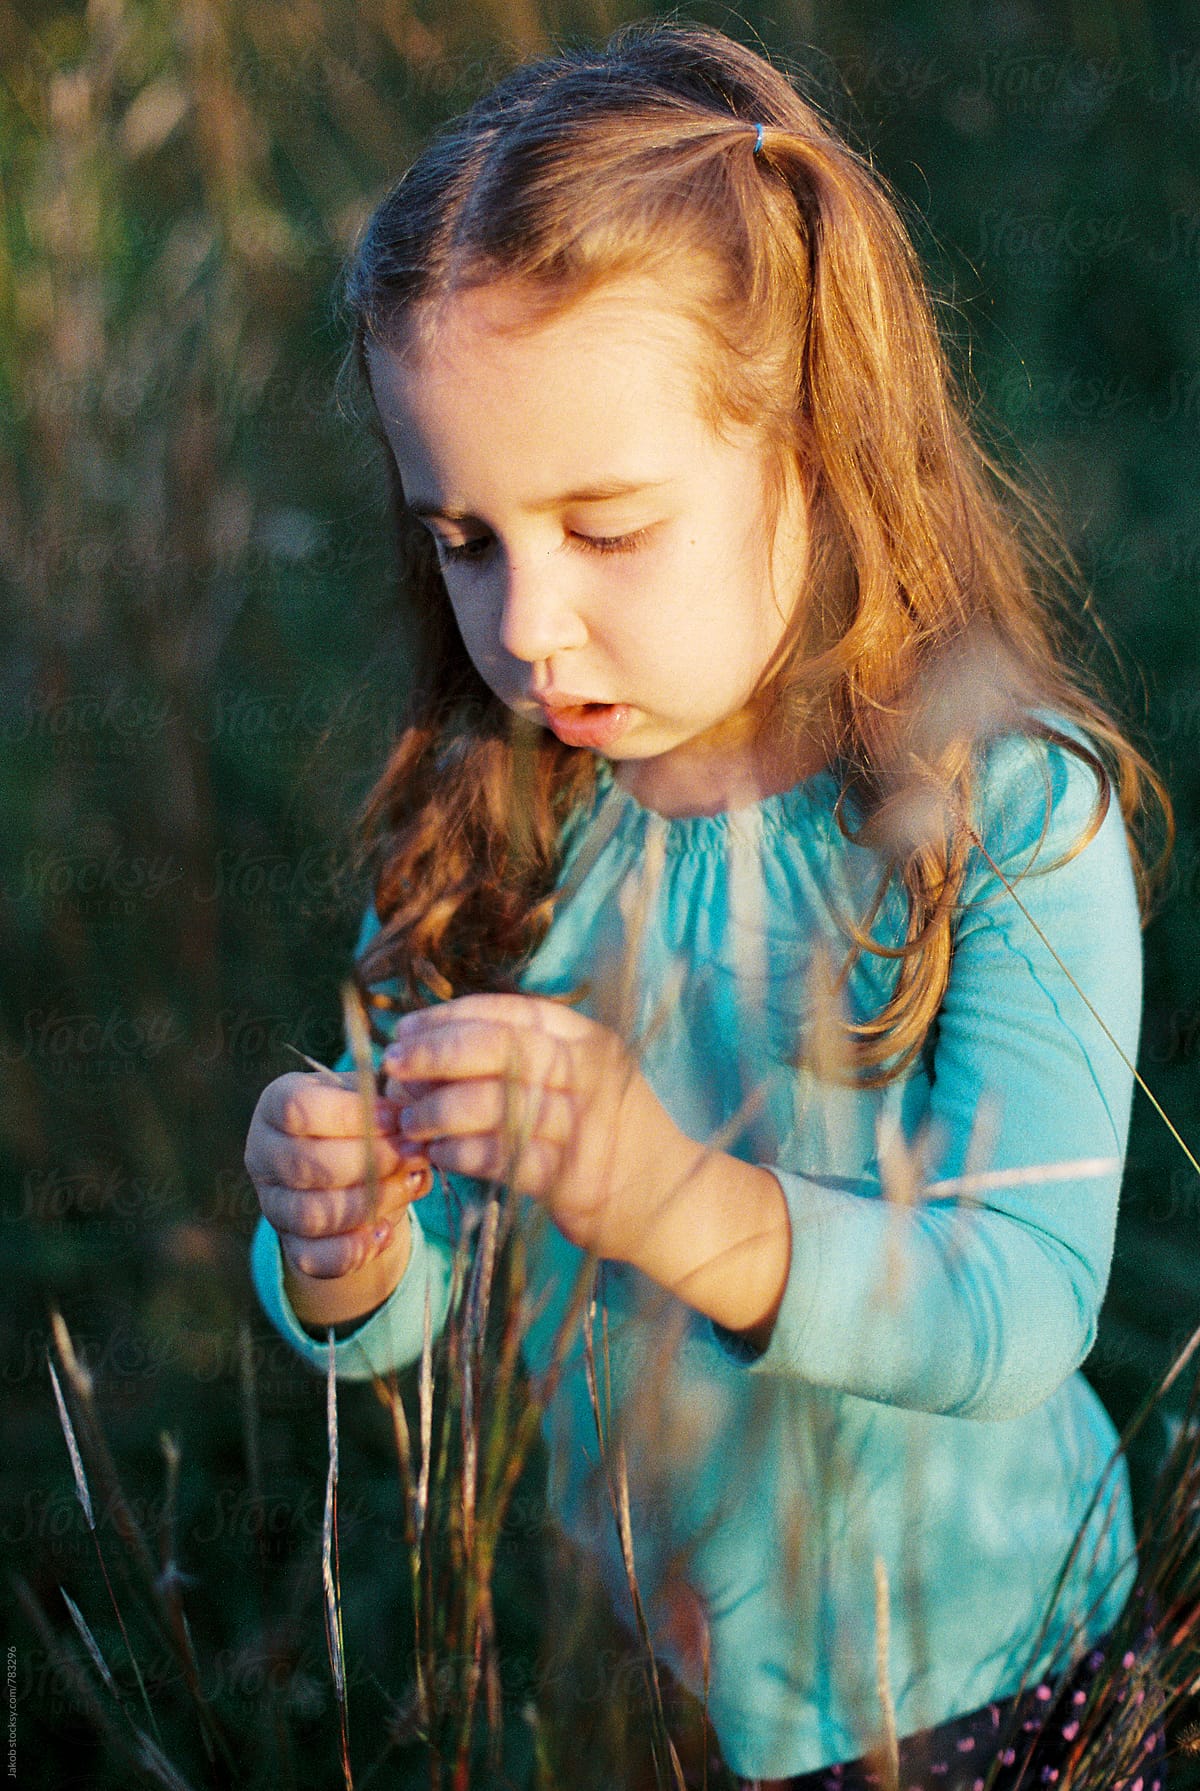 Portrait Of A Beautiful Young Girl Playing In A Field Of Tall Grass 